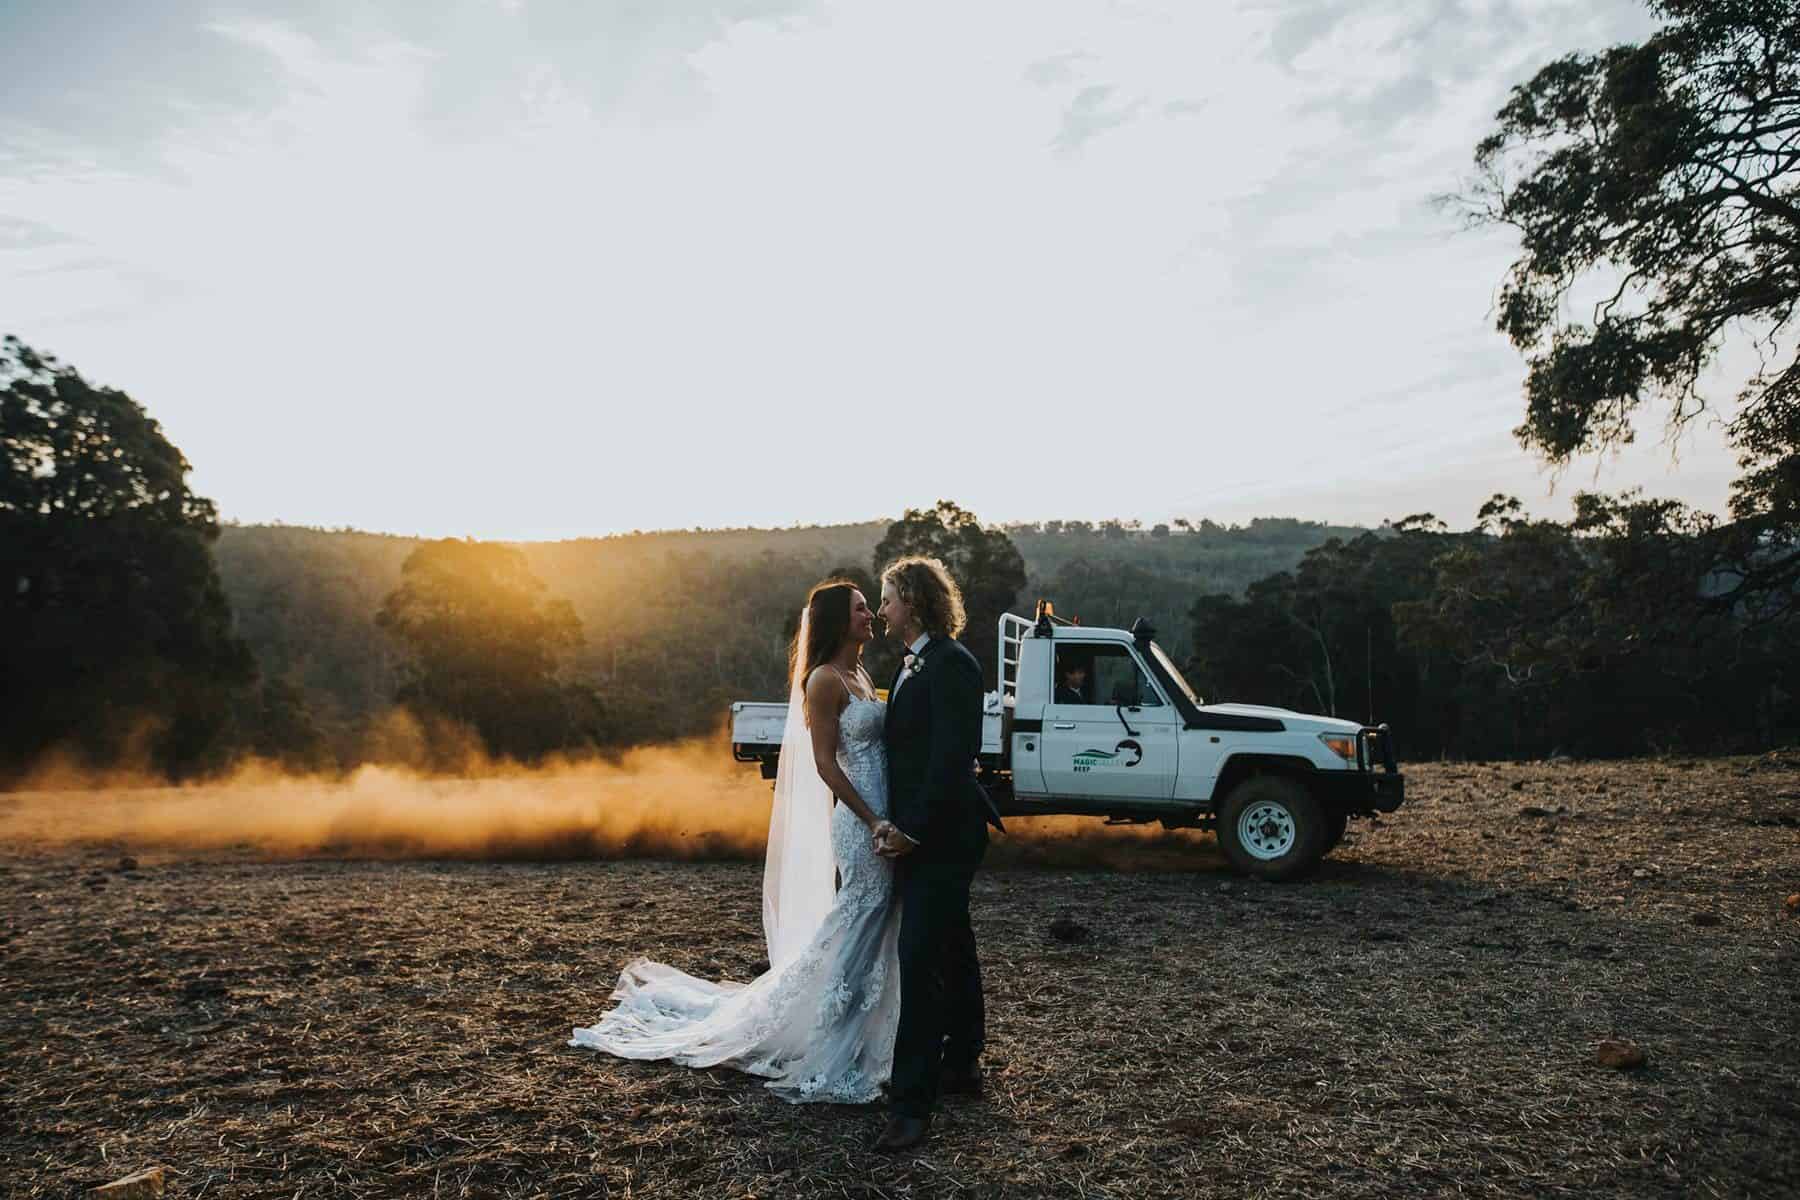 farm wedding 'smoke bomb' created with red dust